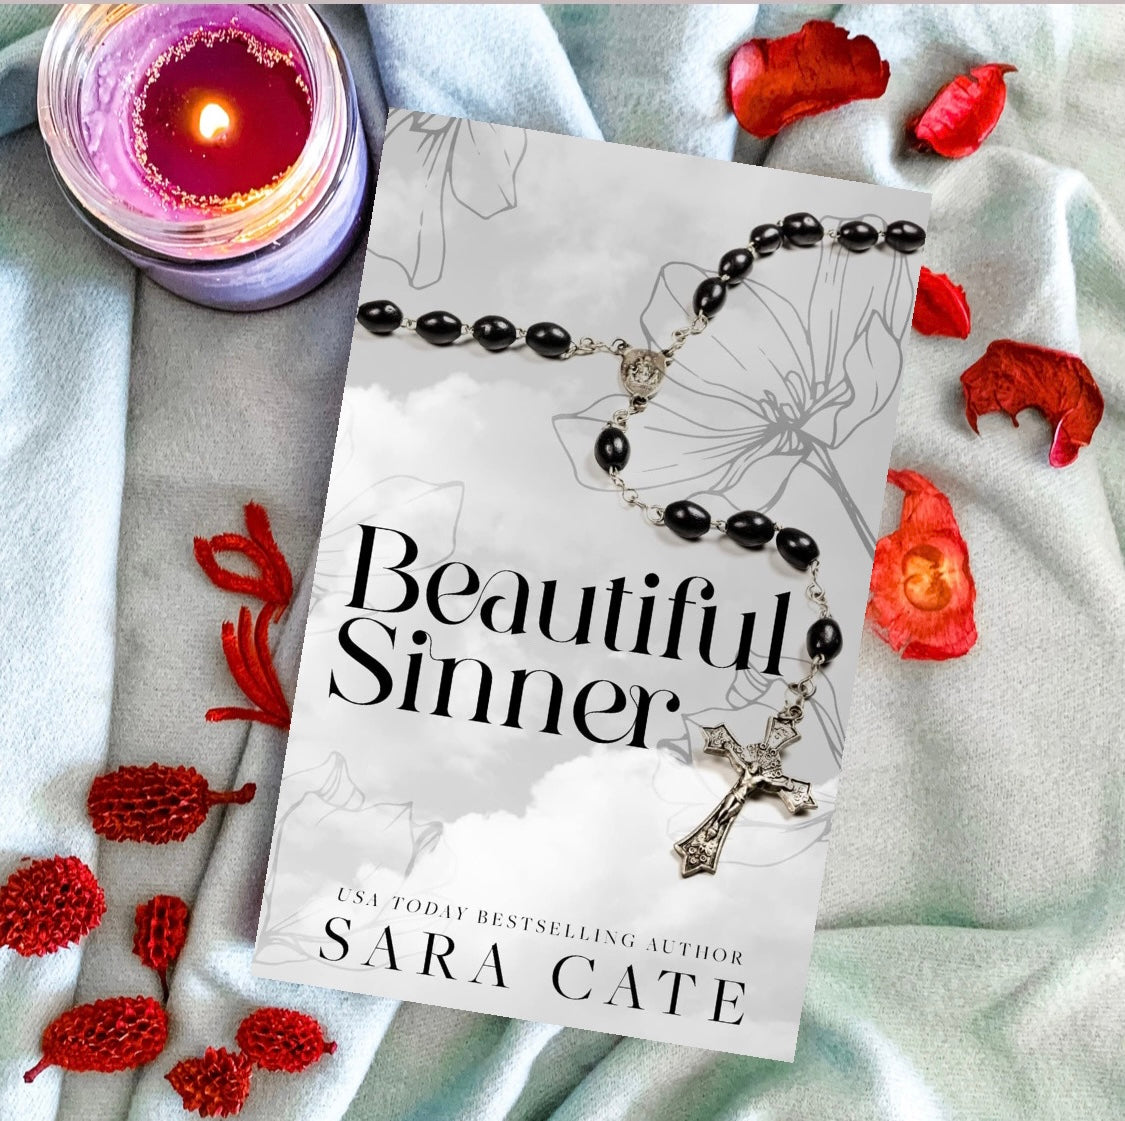 Beautiful Series (Special Editions) by Sara Cate